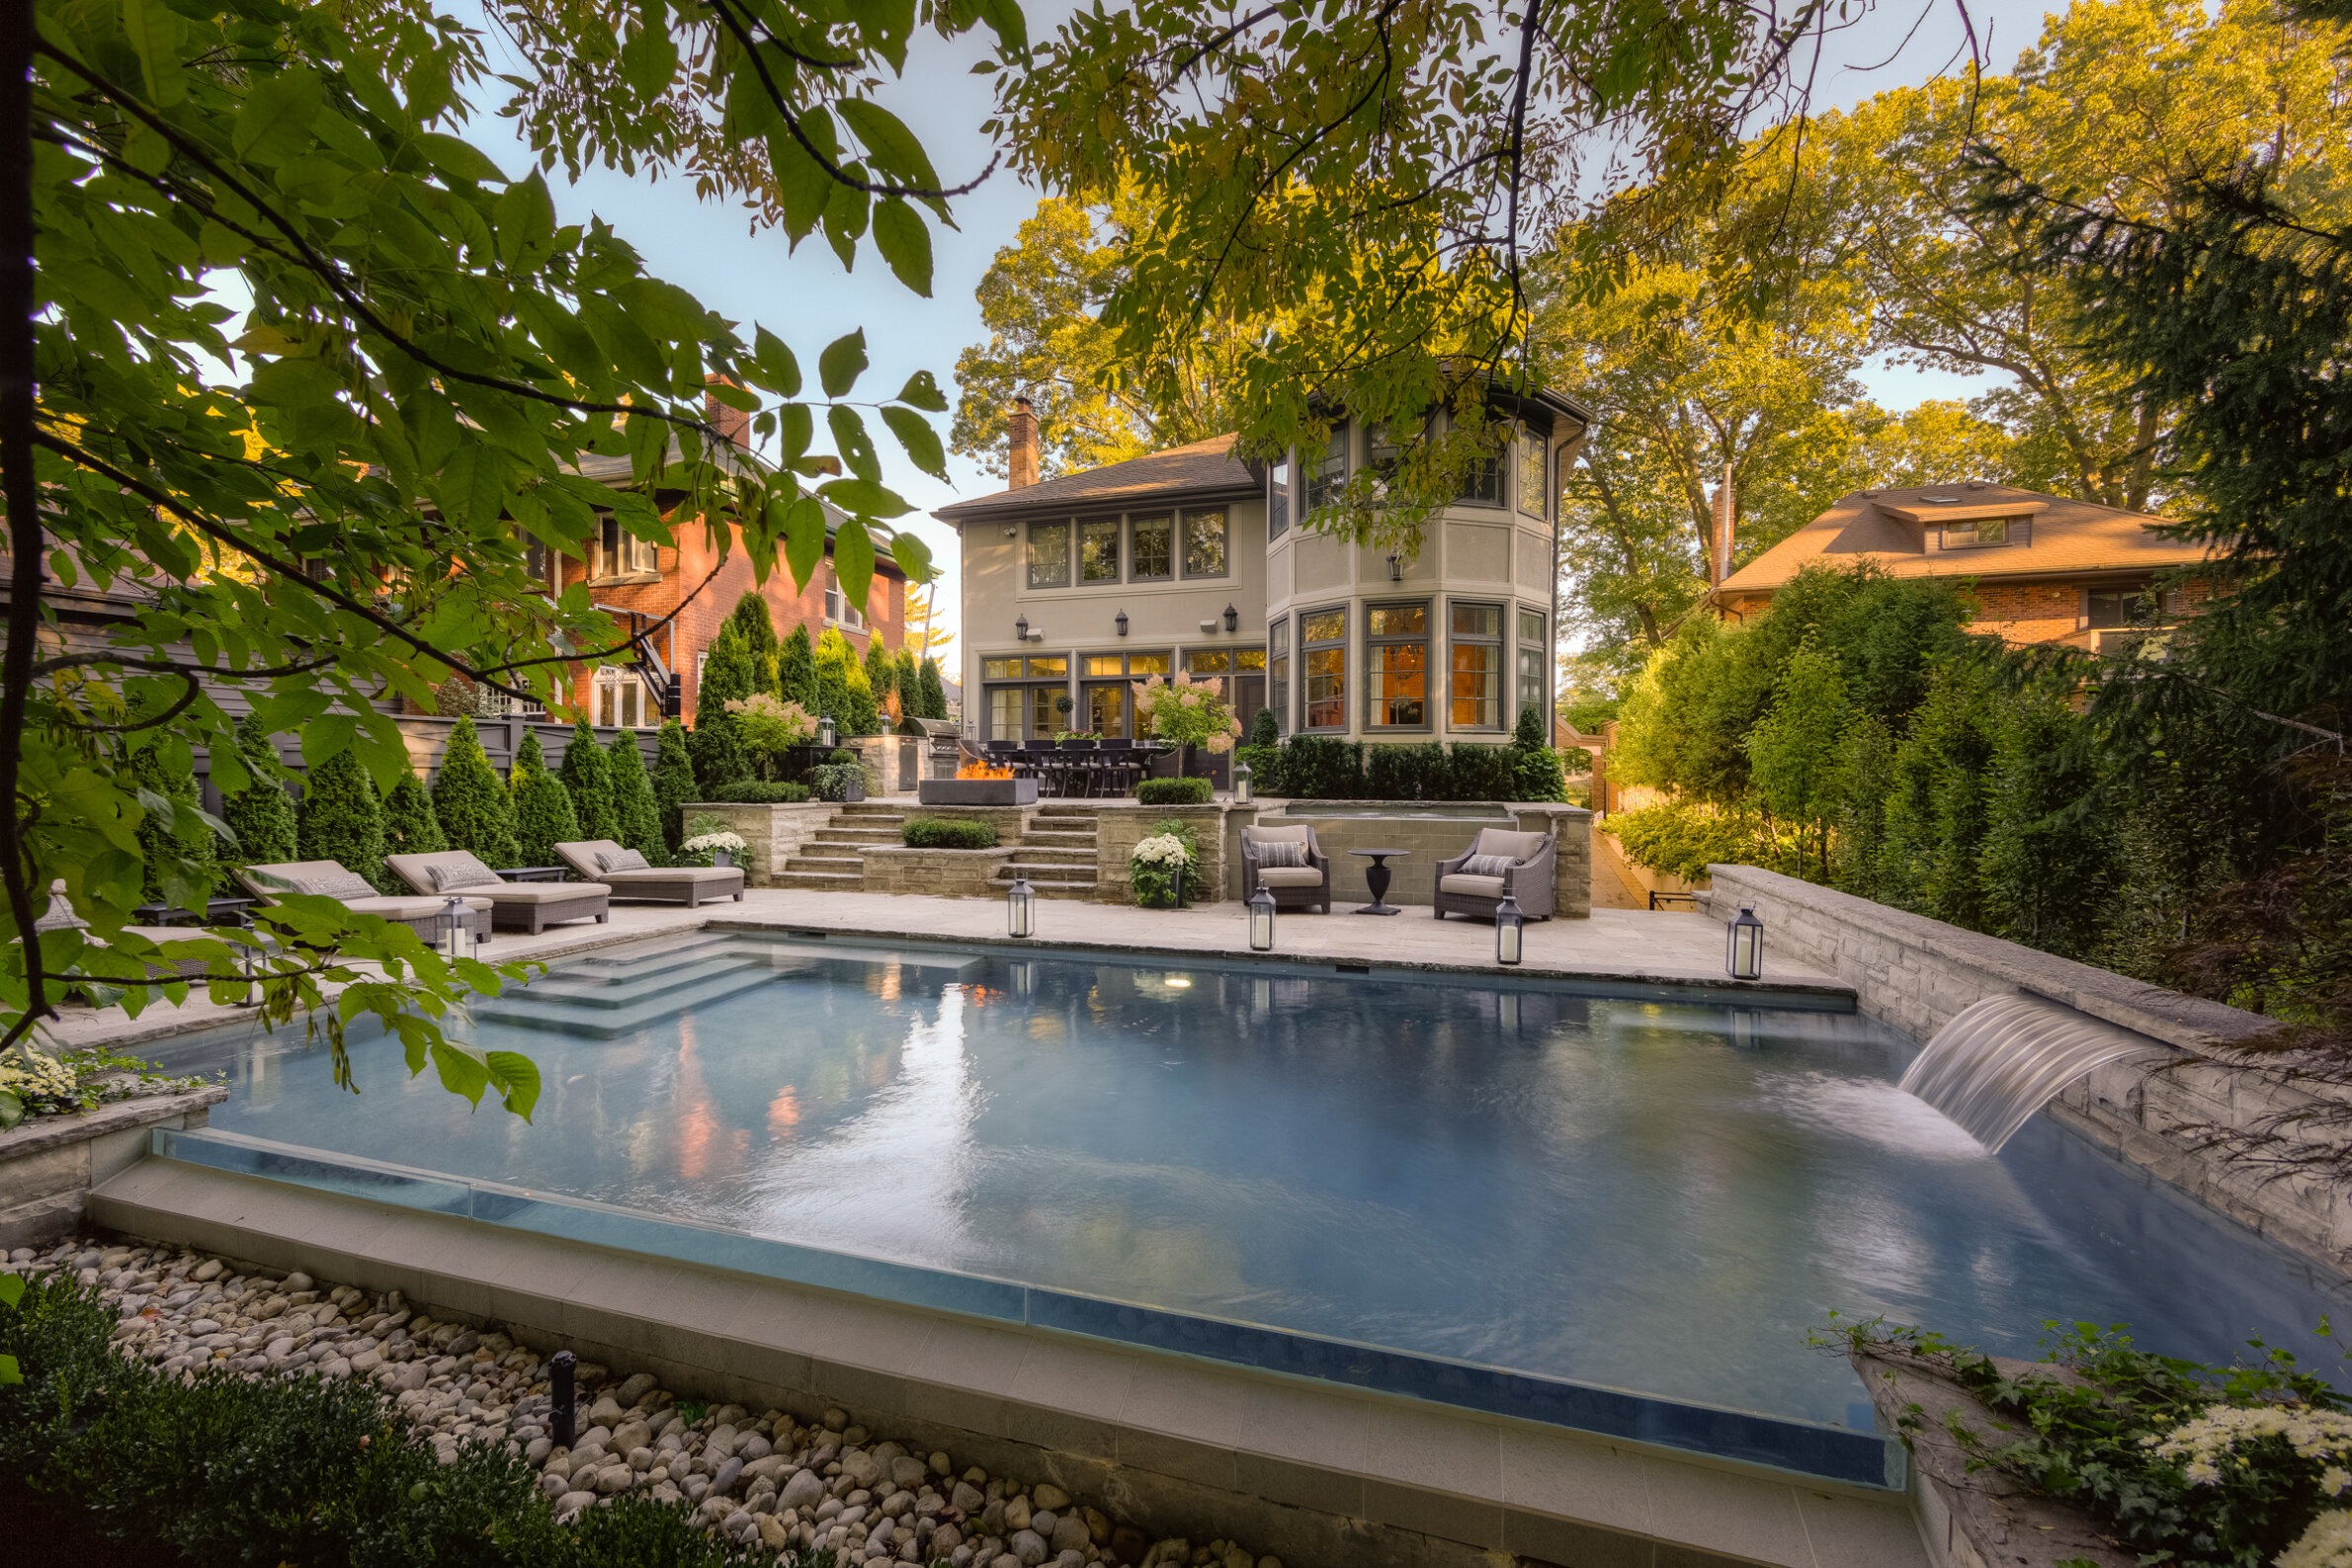 An elegant backyard with a large swimming pool, surrounded by manicured greenery, comfortable outdoor furniture, and a two-story house with large windows.